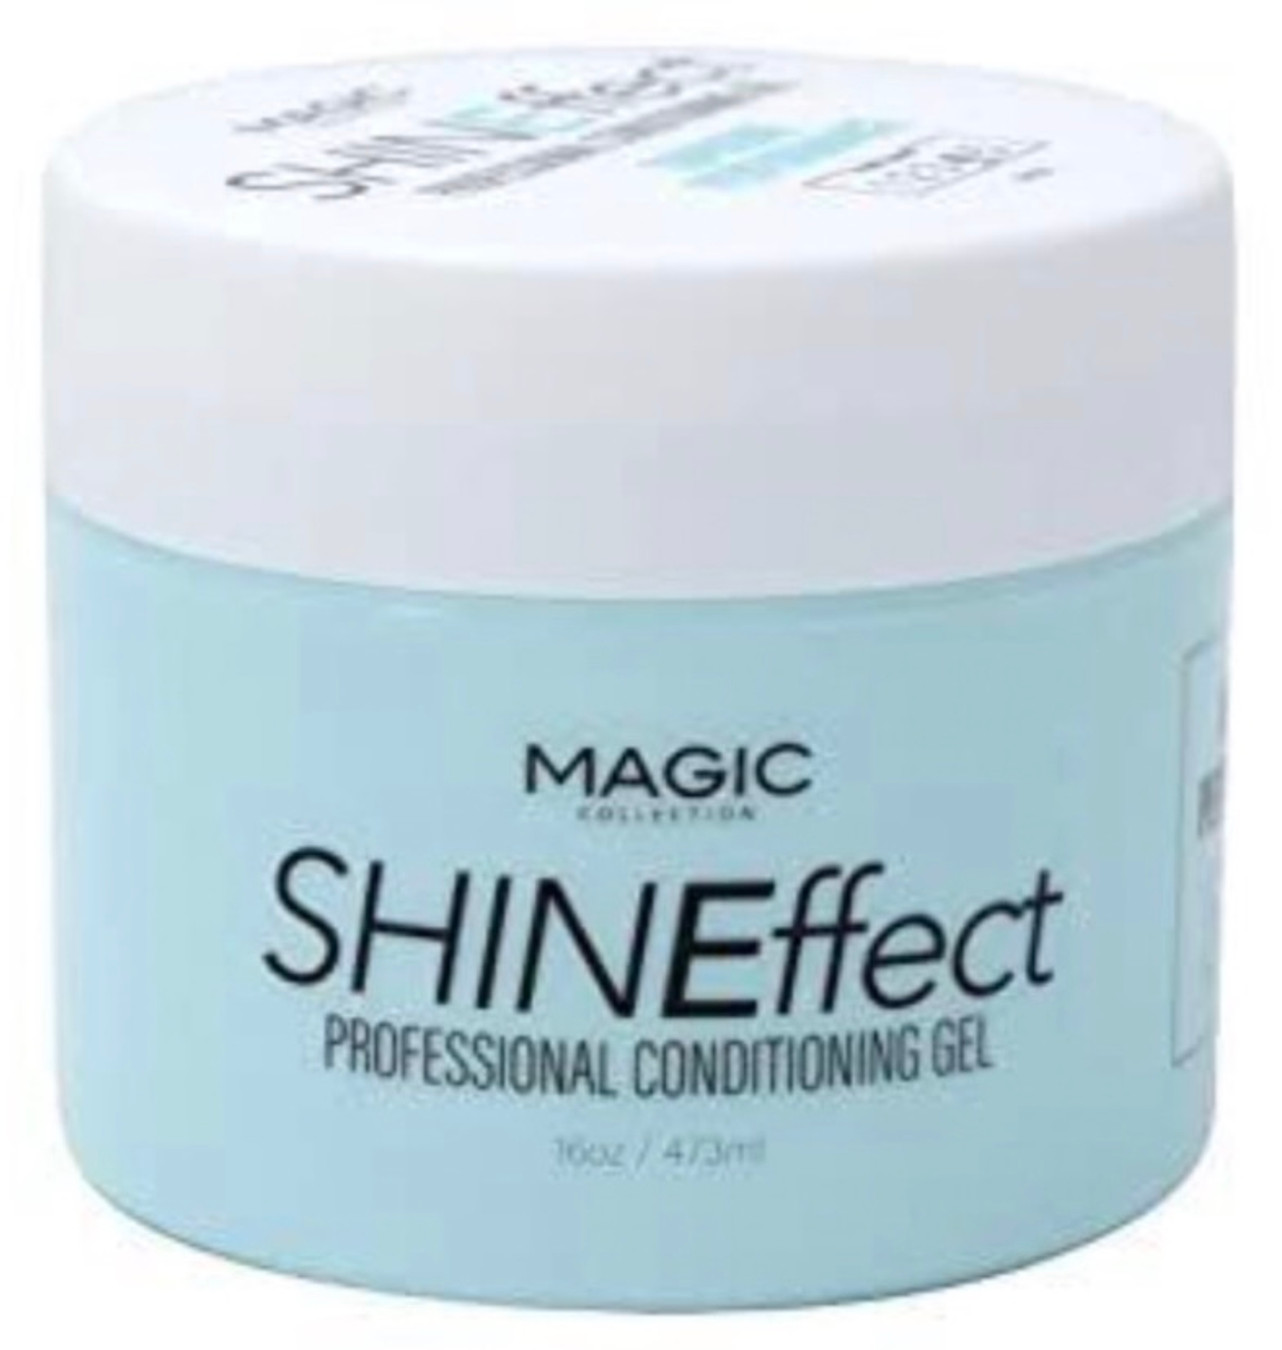 MAGIC COLLECTION Shineffect Professional Conditioning Gel [Supreme Performance]